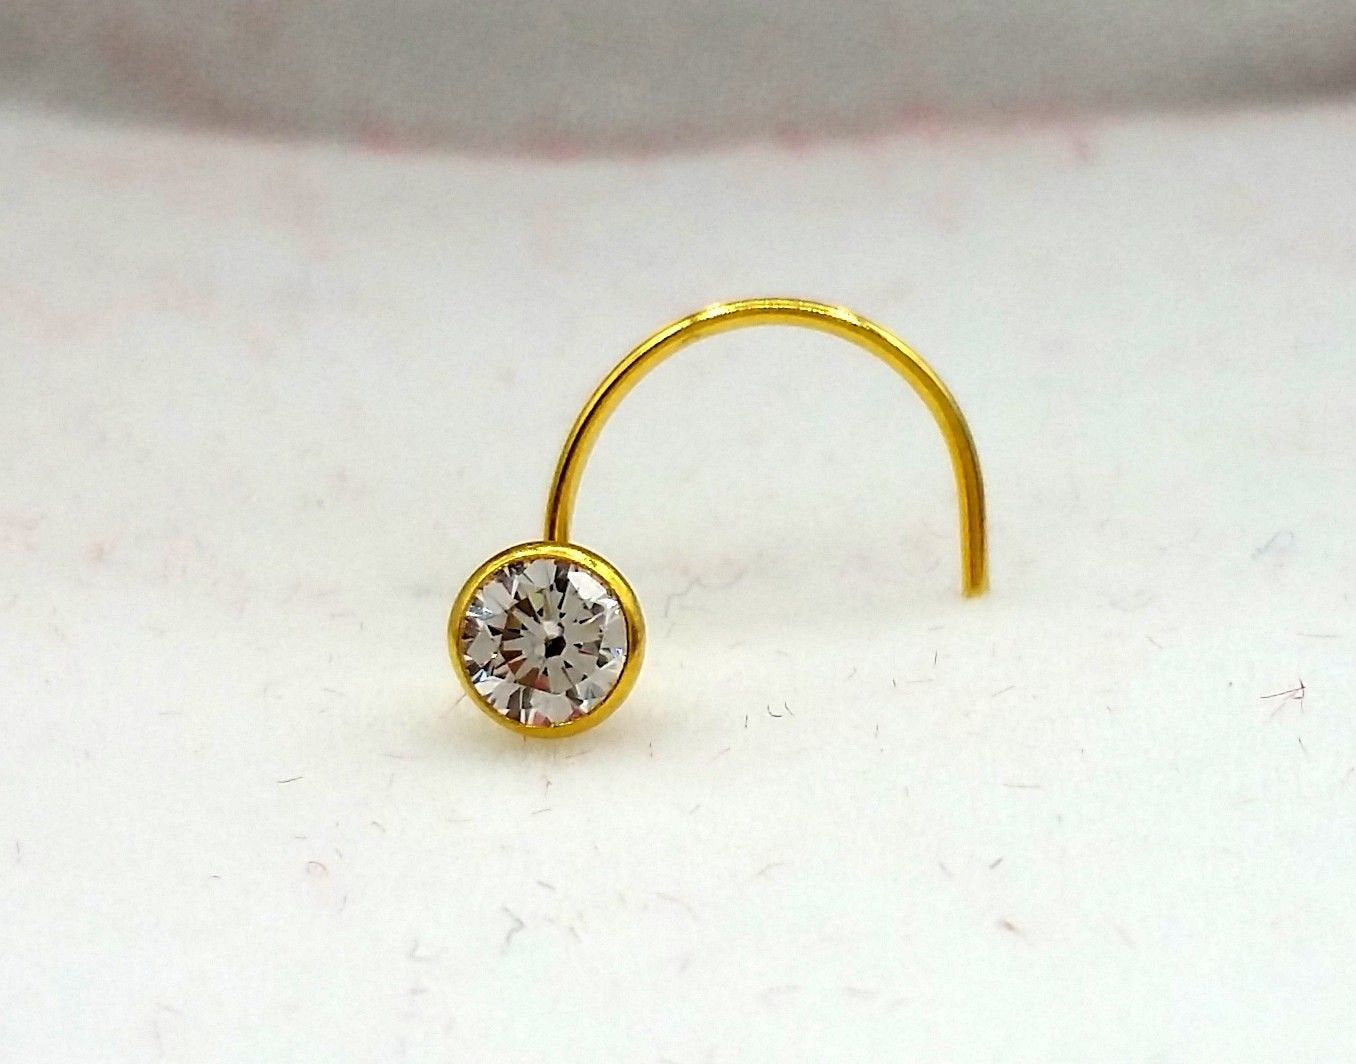 Buy Small Nose Ring, Indian Nose Rings , Nose Rings, Tiny Nose Stud ,  Tragus, Indian Nose Stud, Tiny Nose Ring, Nose Stud, Cartilage, Hook, Rook  Online in India - Etsy